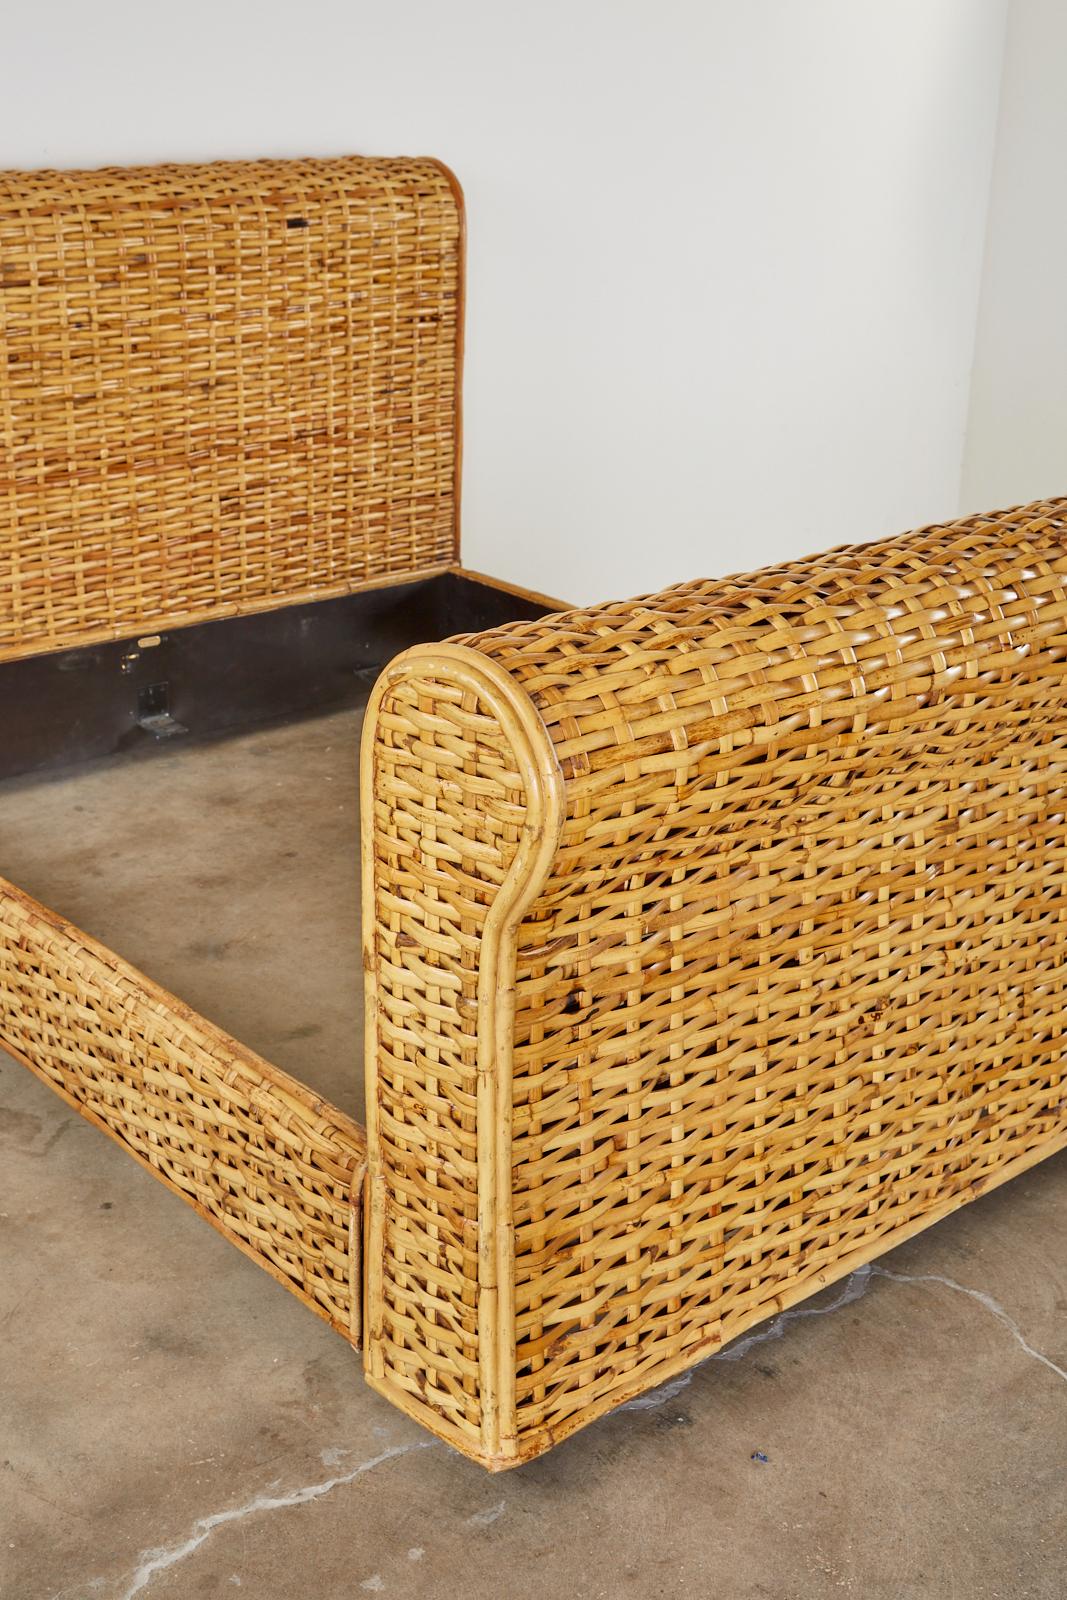 American Ralph Lauren Home Collection Woven Rattan Wicker Bed For Sale